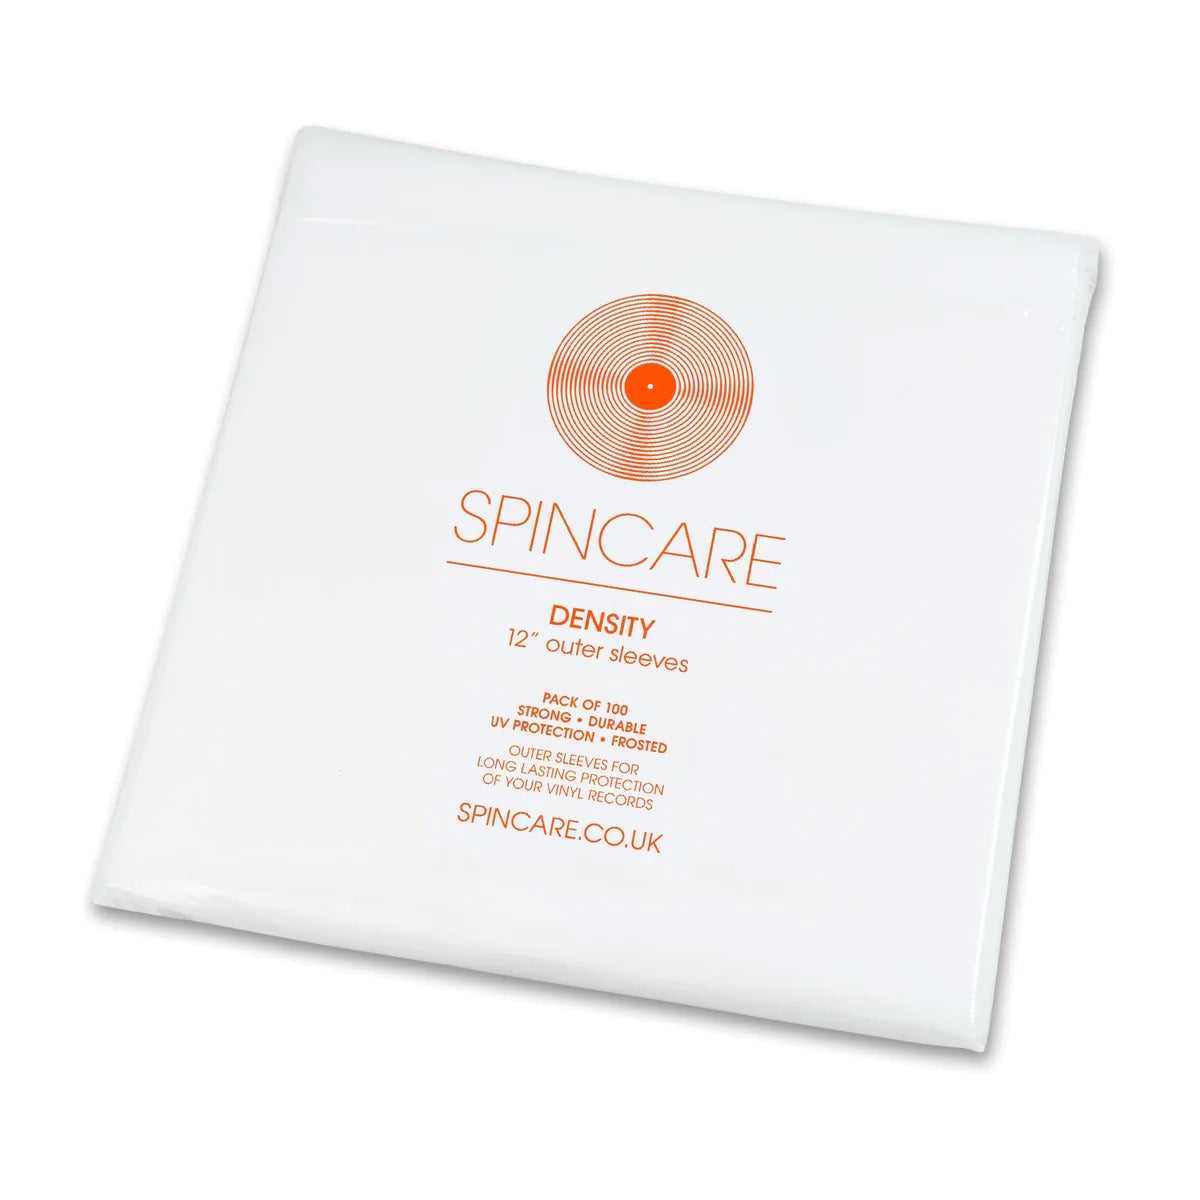 Spincare 'DENSITY' 12" Outer Record Sleeves